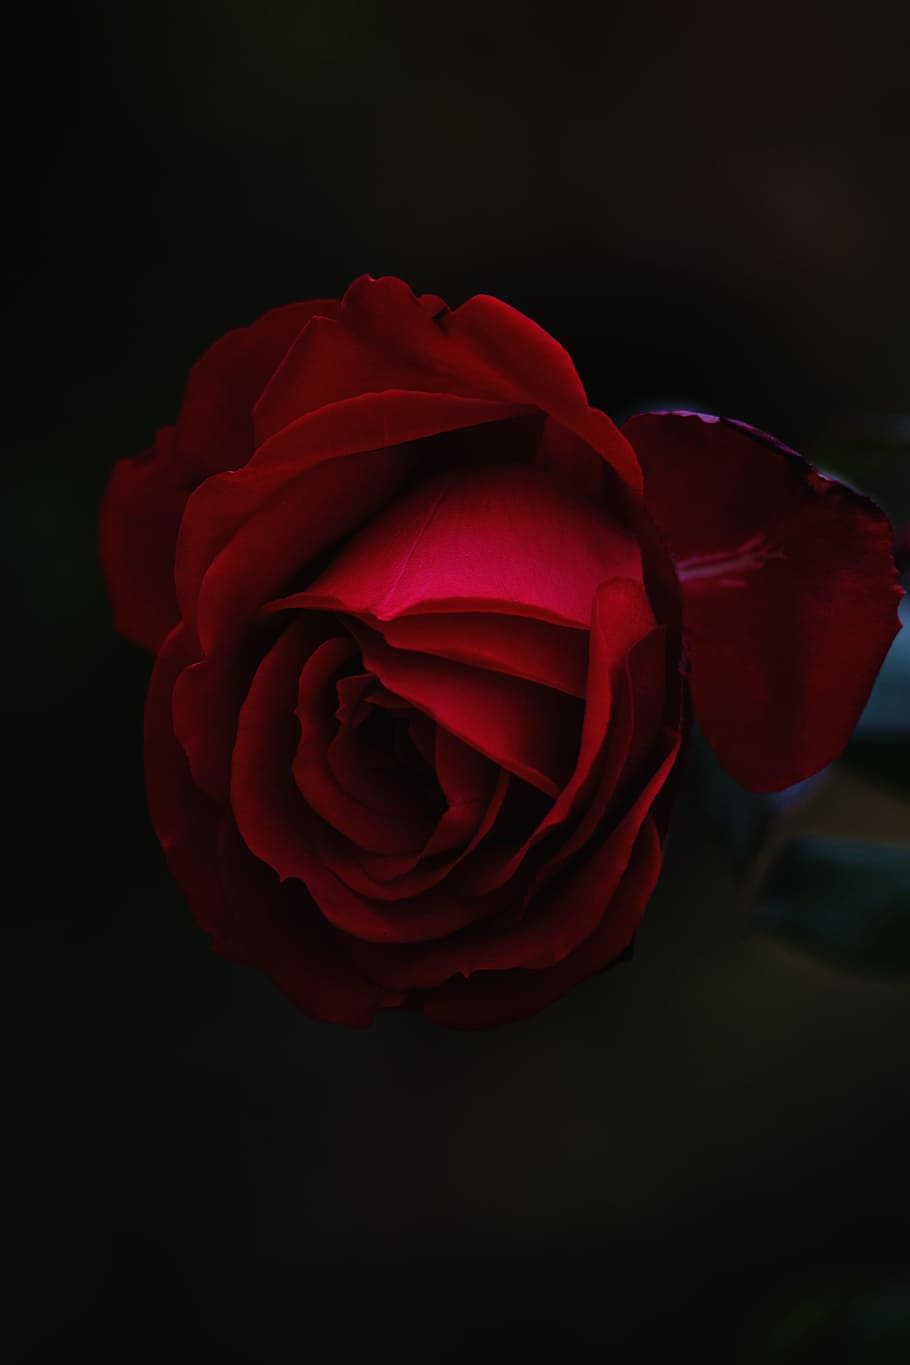 red rose flower, red rose, close-up photography, petal, floral, HD wallpaper